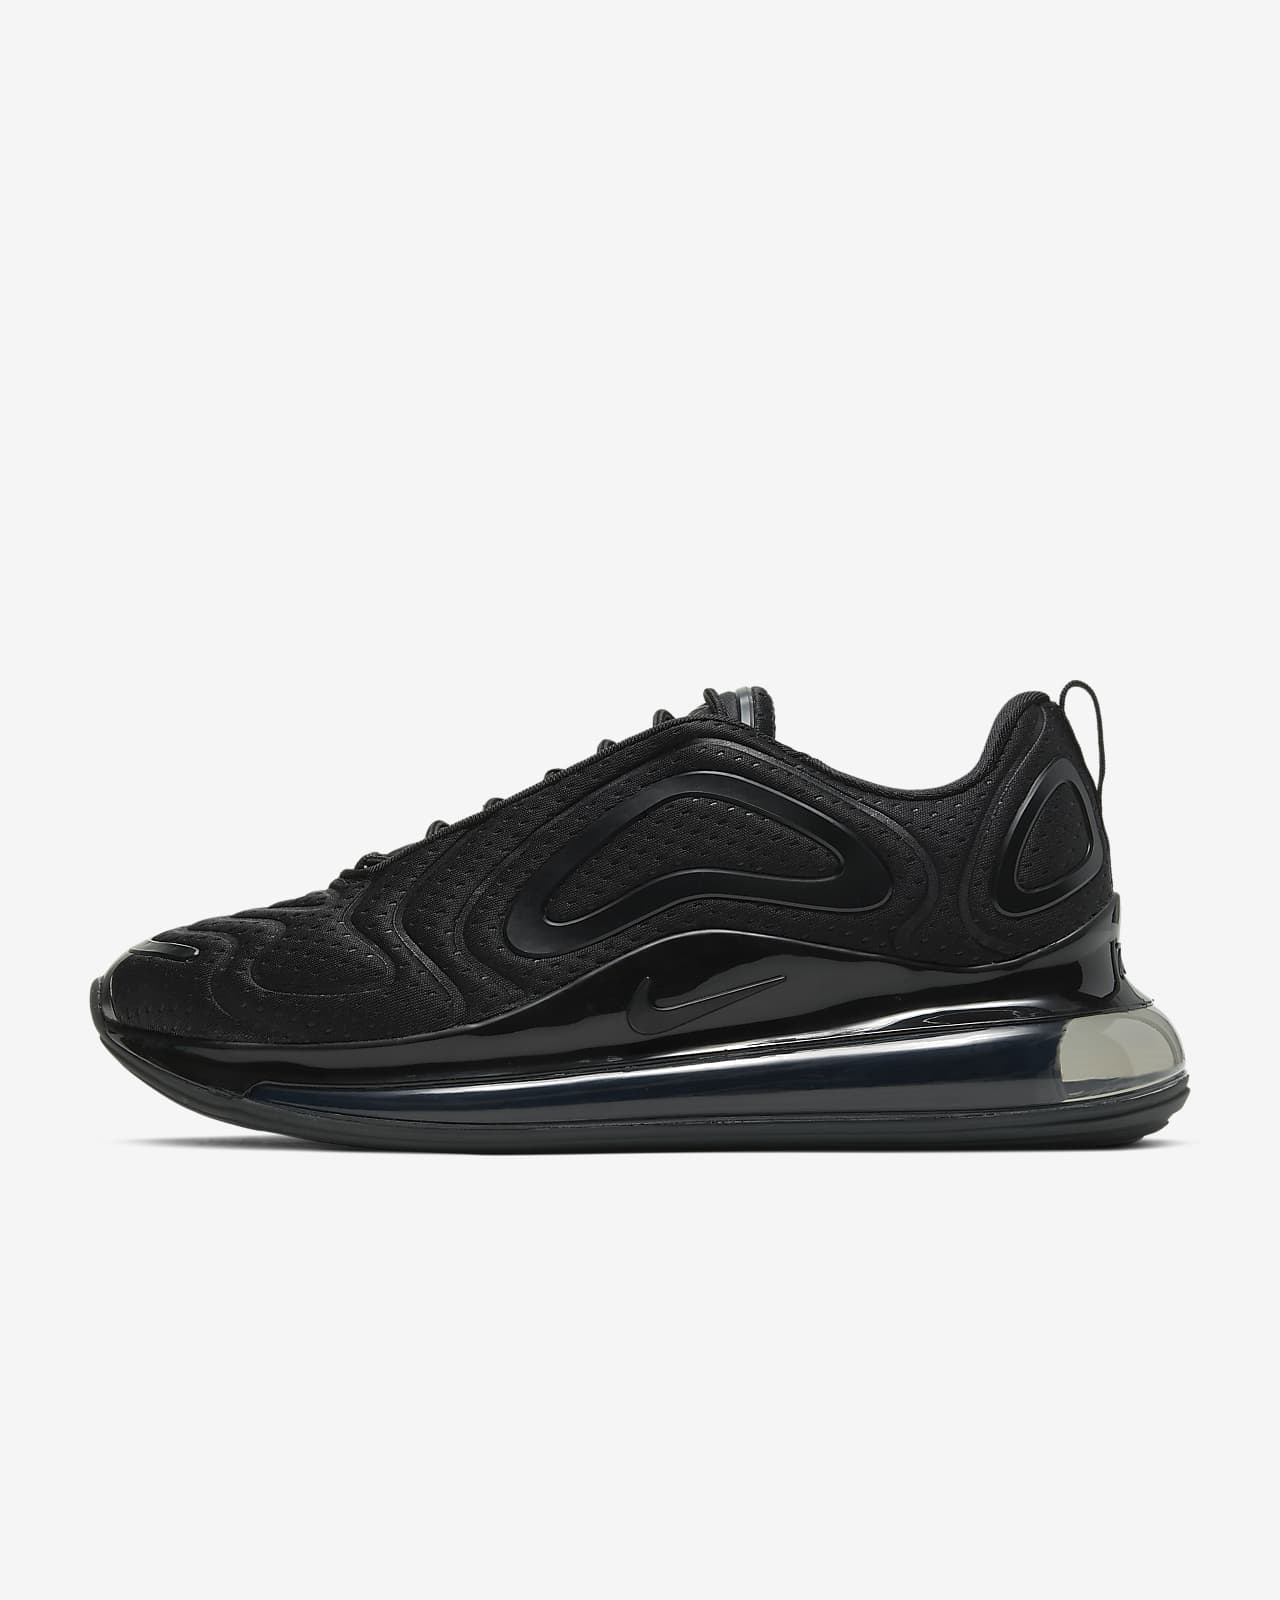 Nike Air Max 720 Black And White - thecocktail-clinic.com